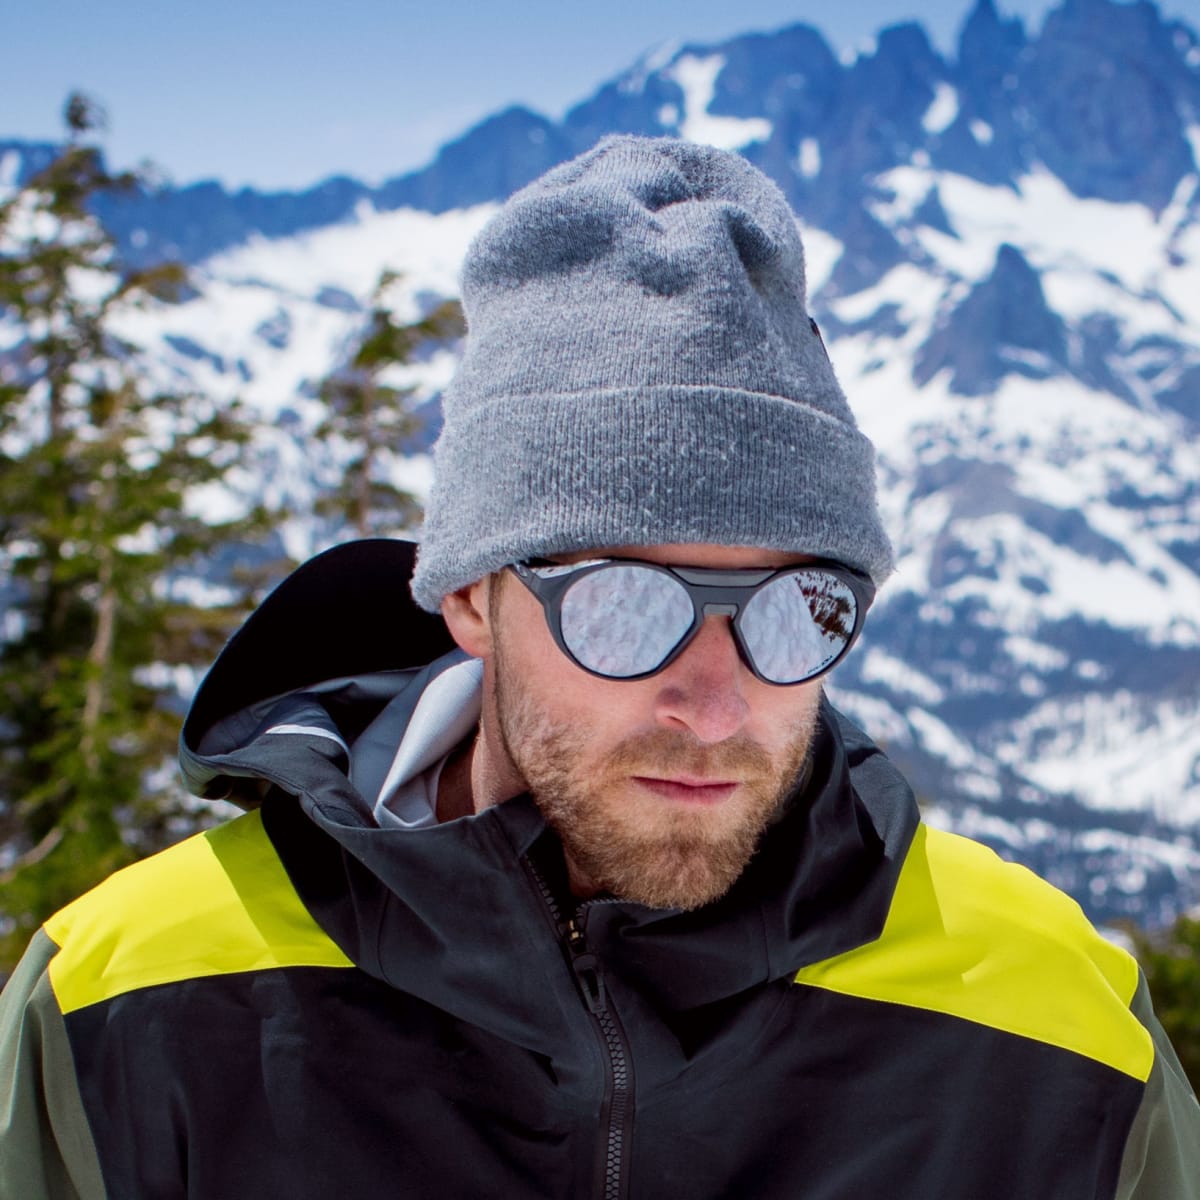 Oakley aims for the summit with its new Clifden mountaineering